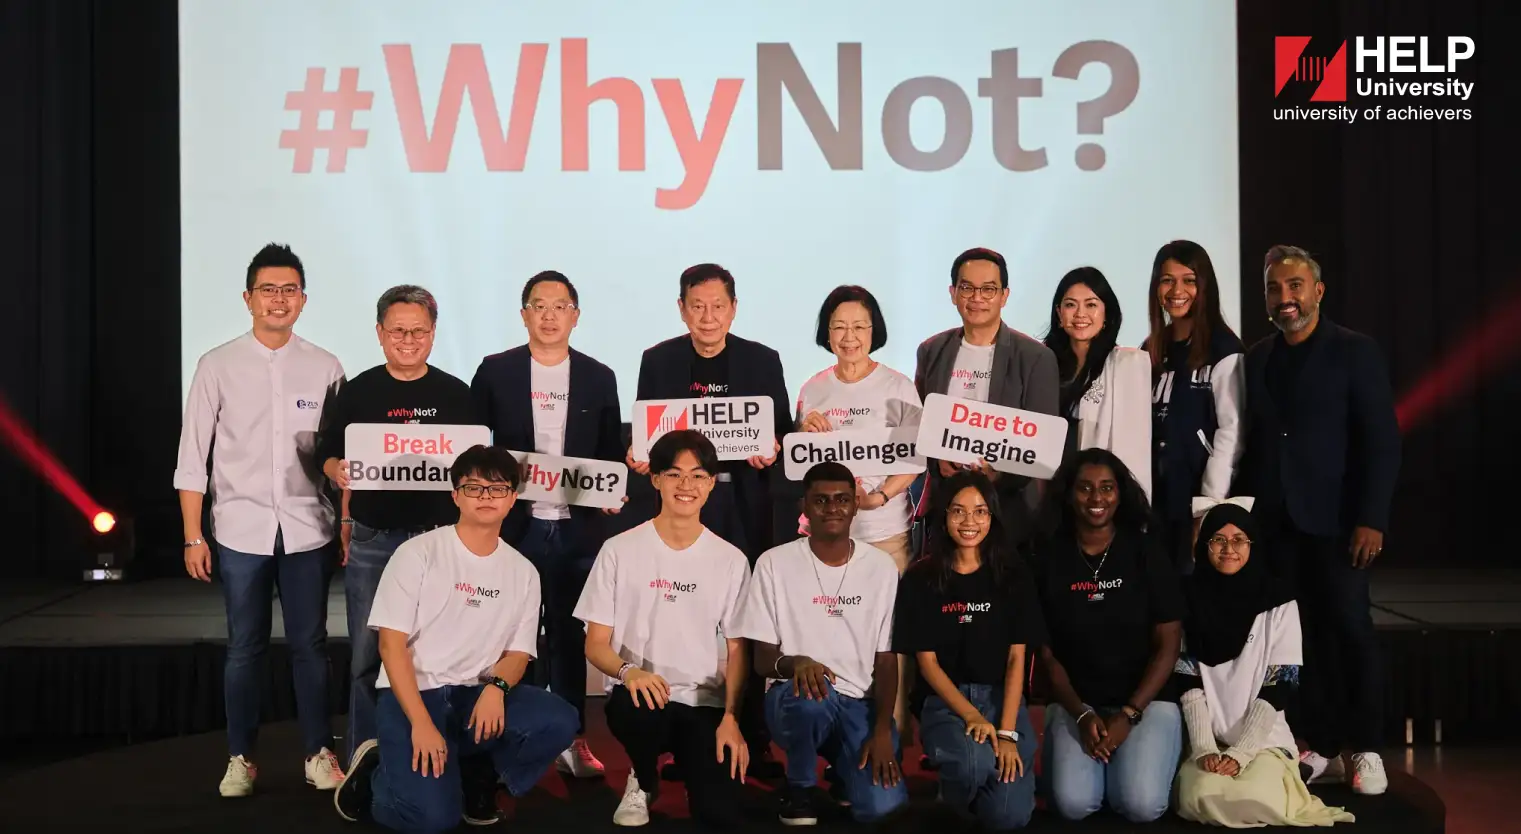 whynot-help-university-new-campaign-shaping-future-education